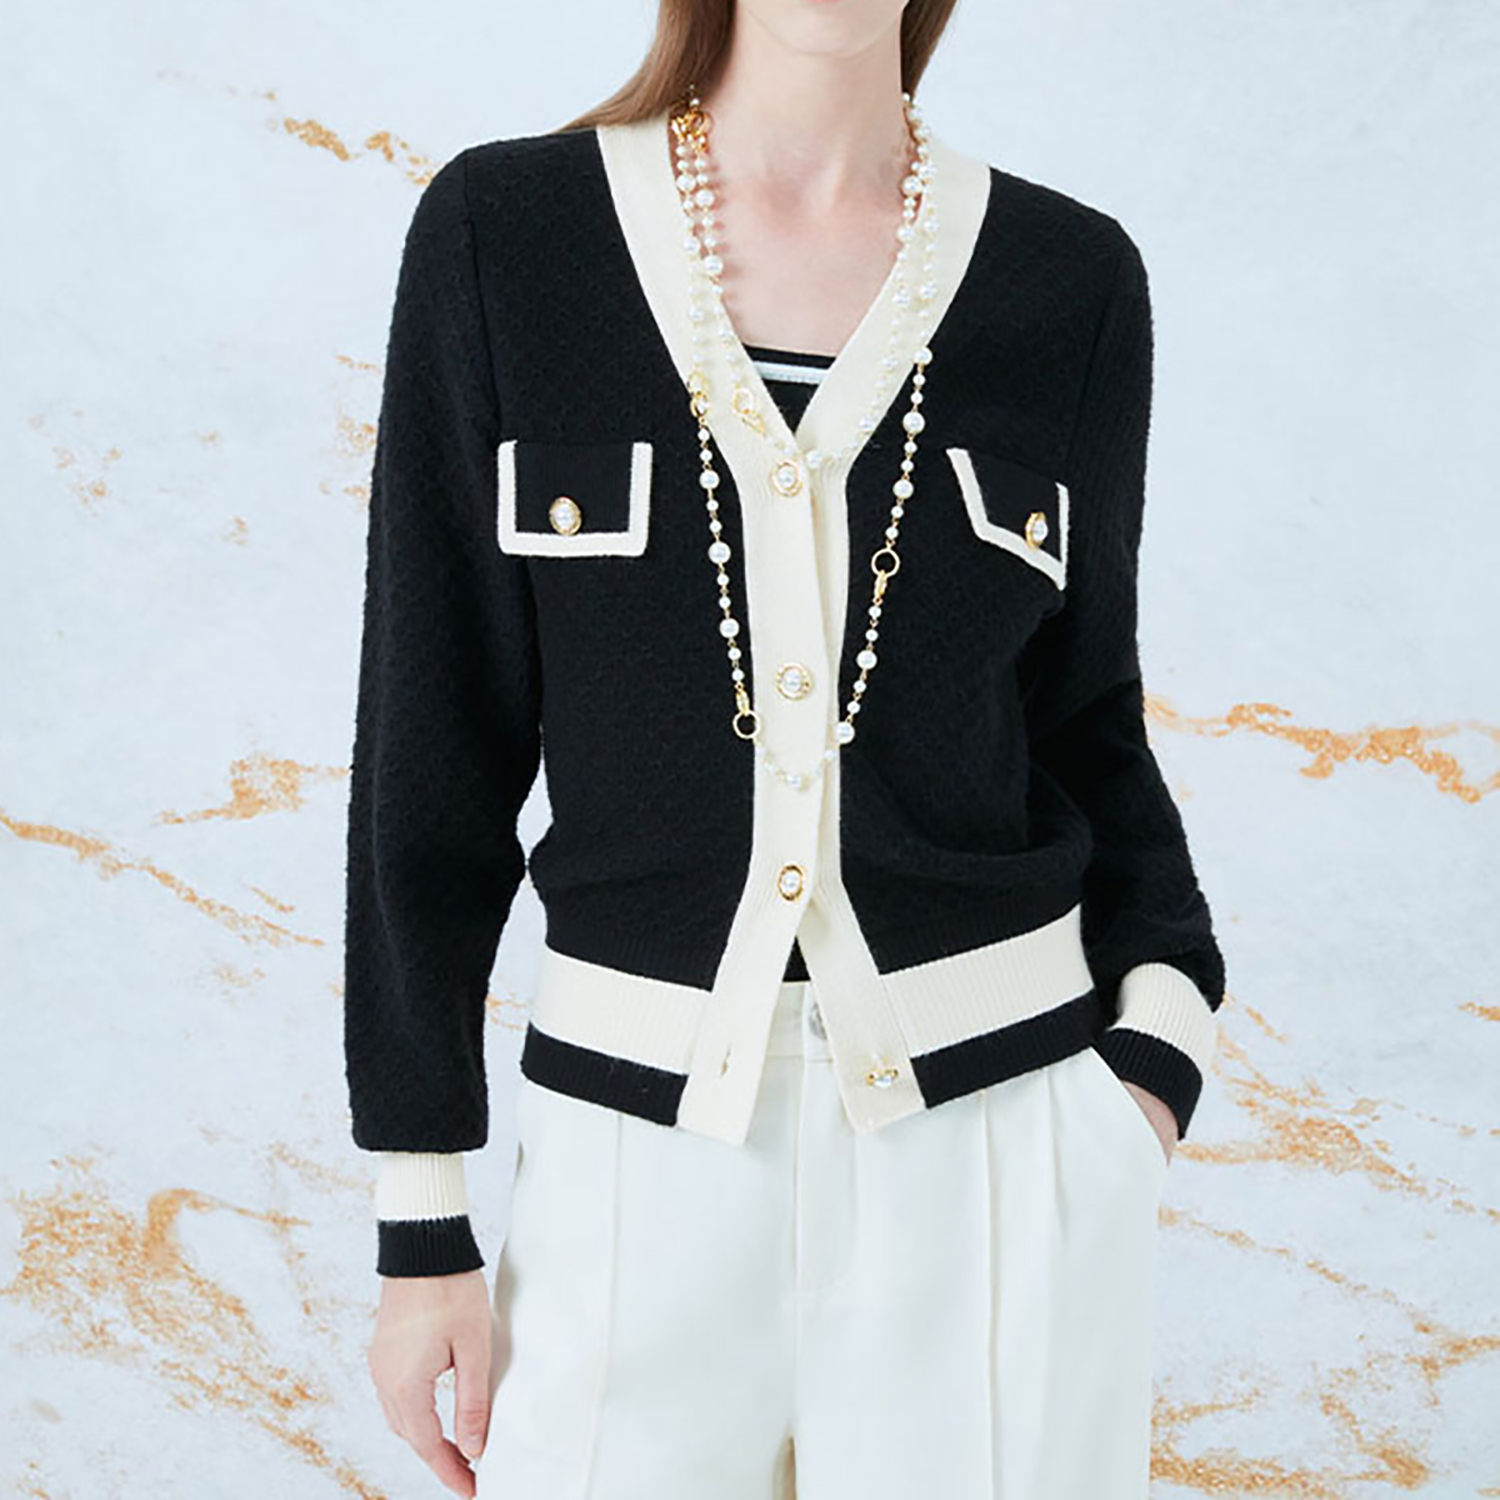 Autumn classic contrast trim pearl buttons women's knit cardigan sweater